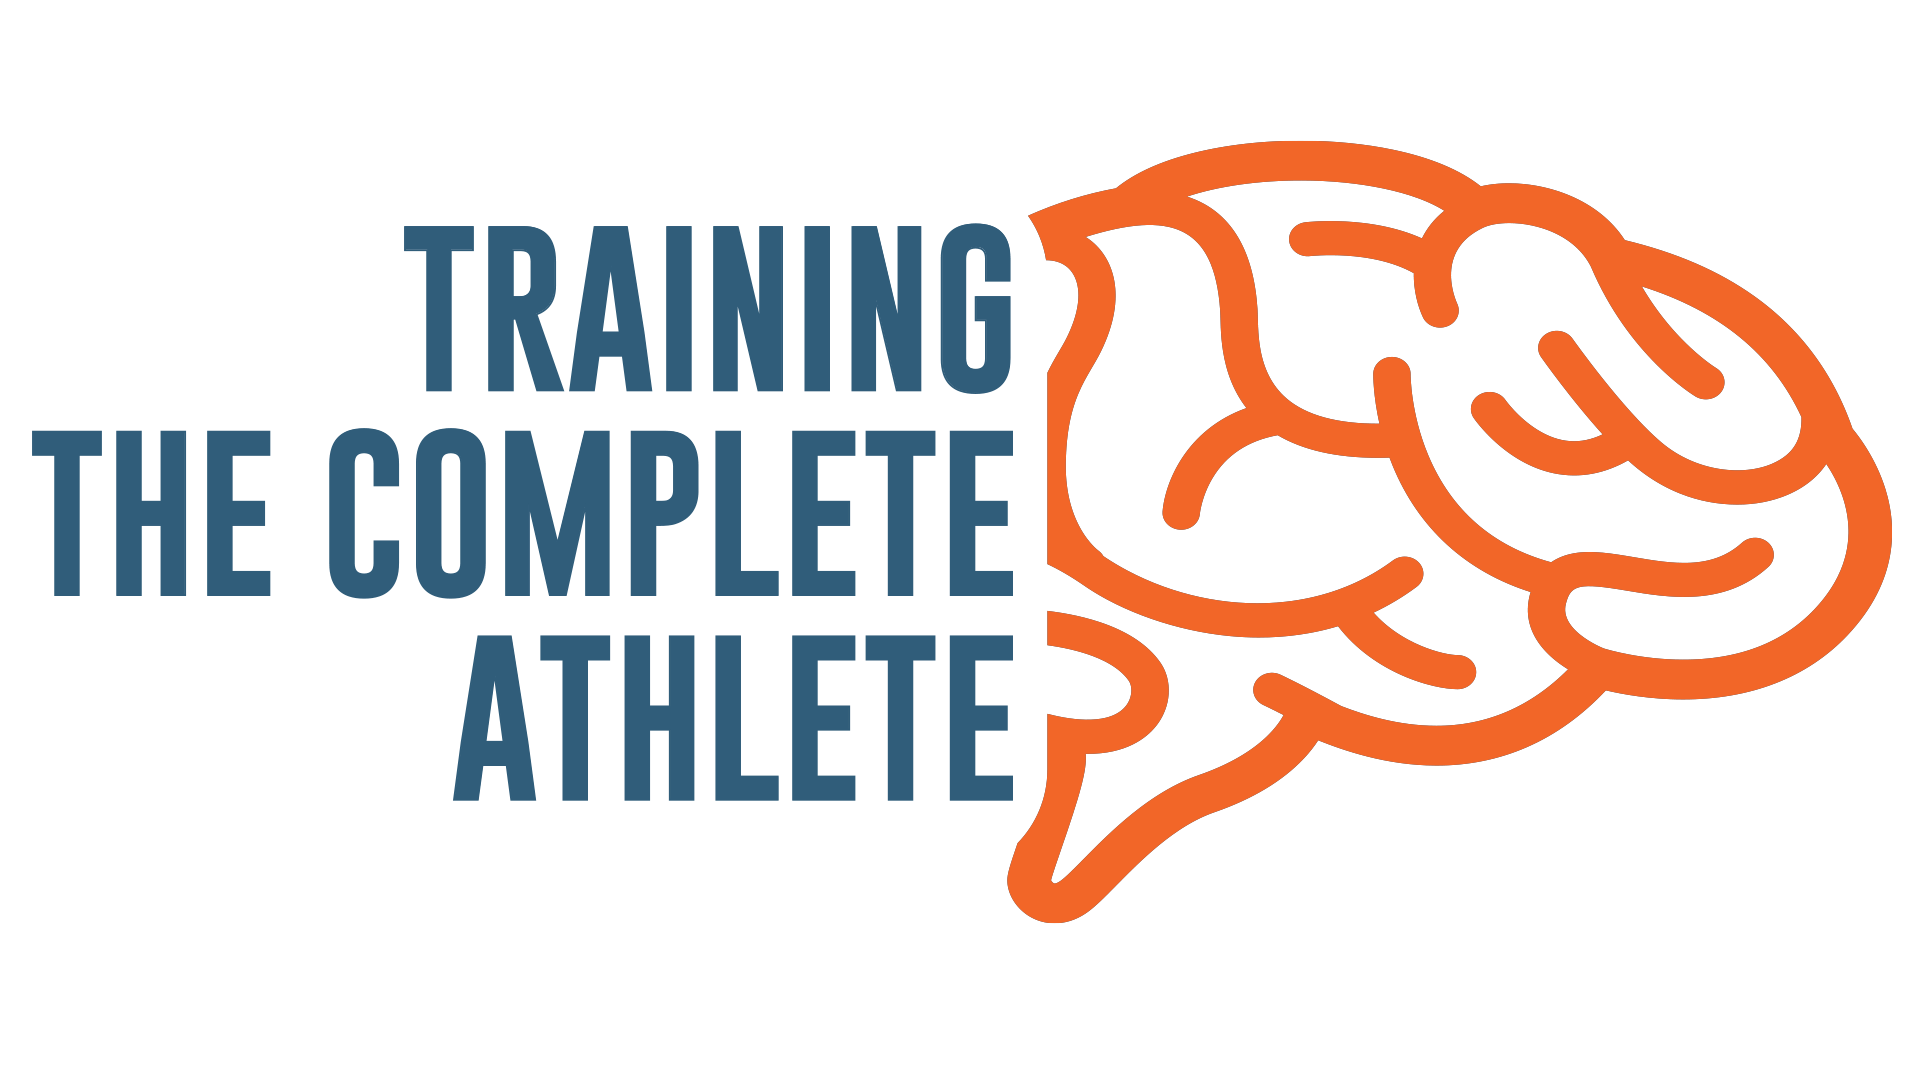 Training the Complete Athlete